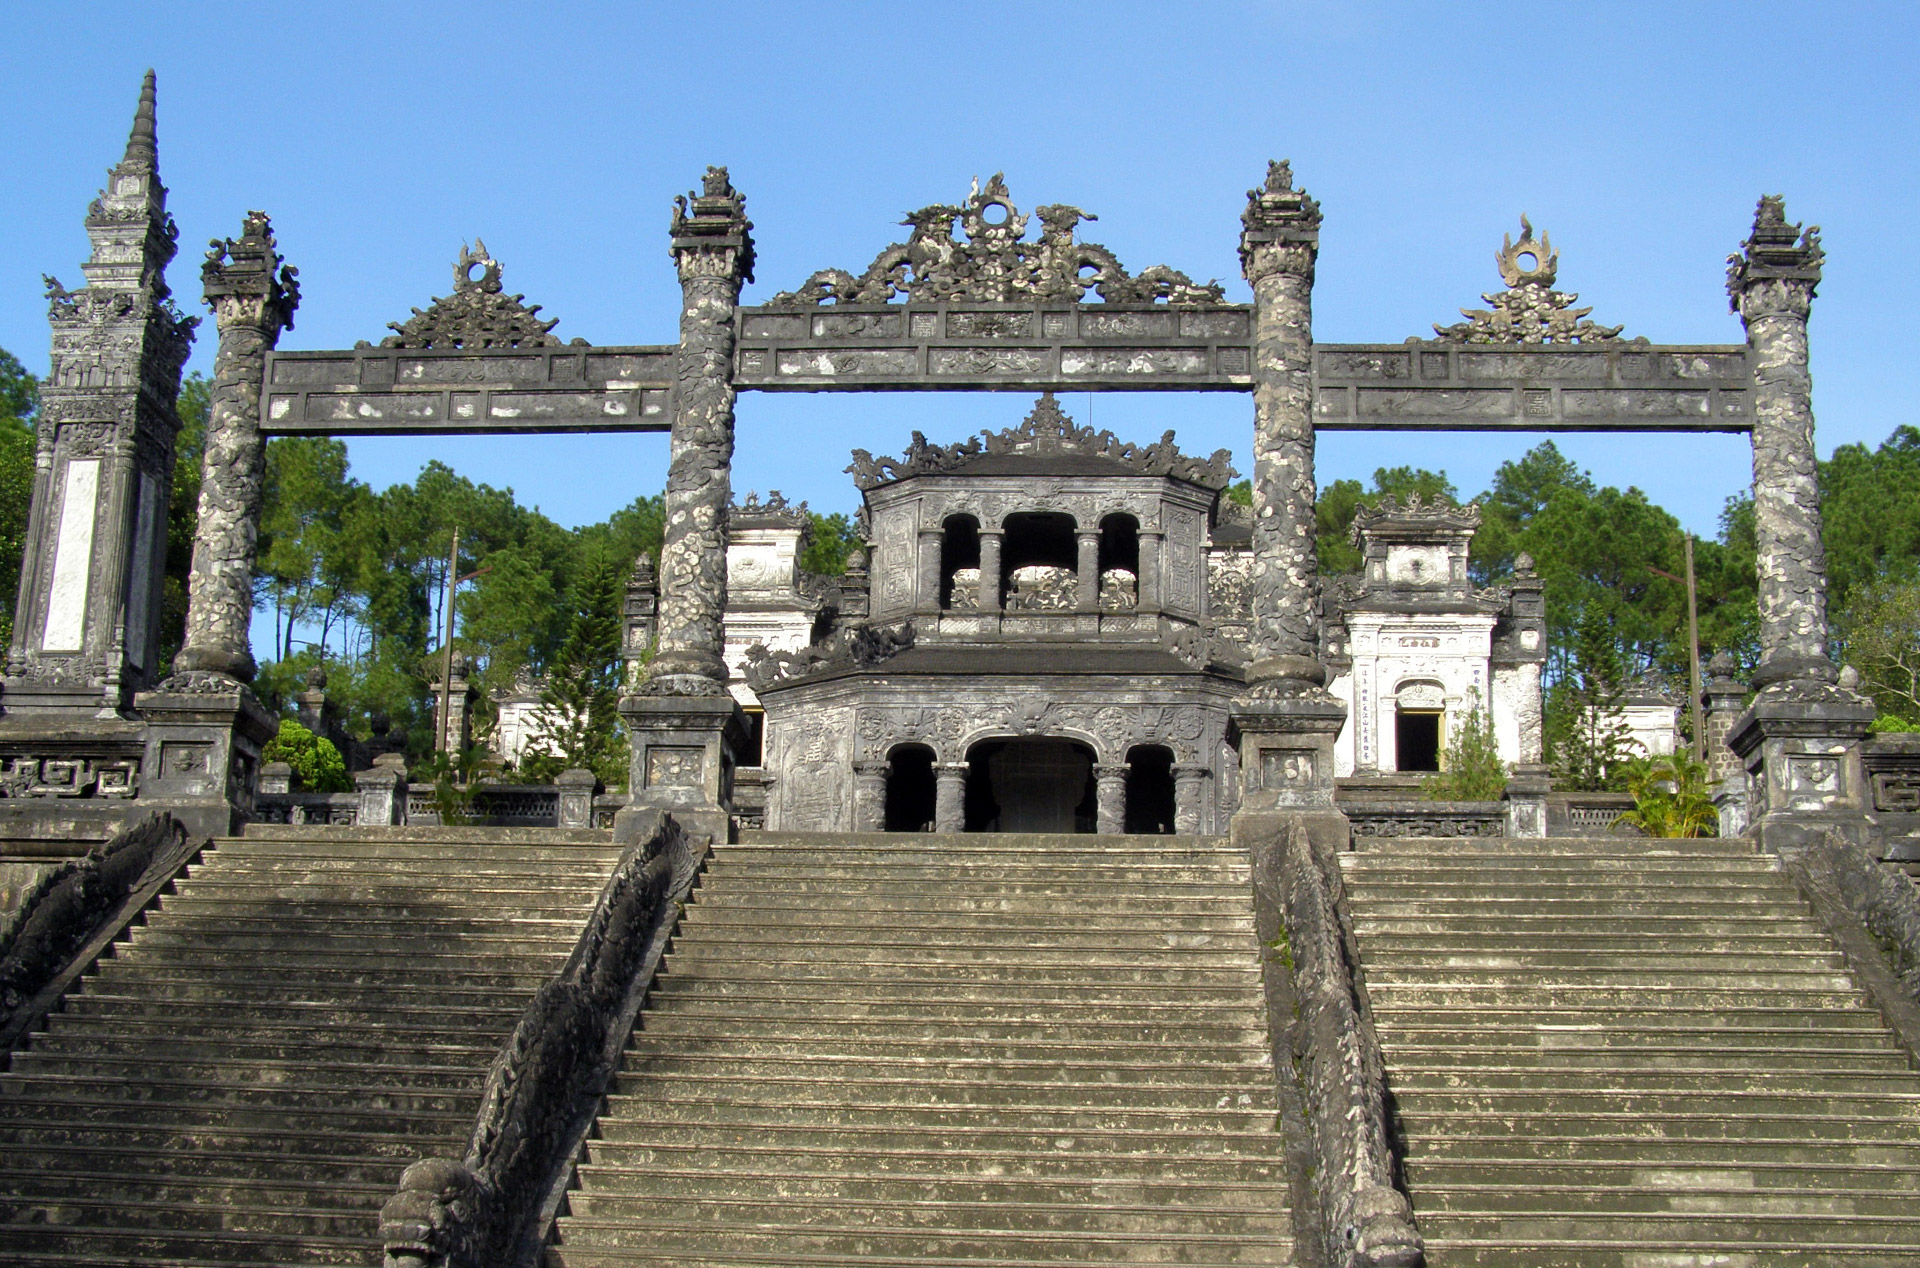 UNESCO World Heritage Site, The Imperial City of Hue